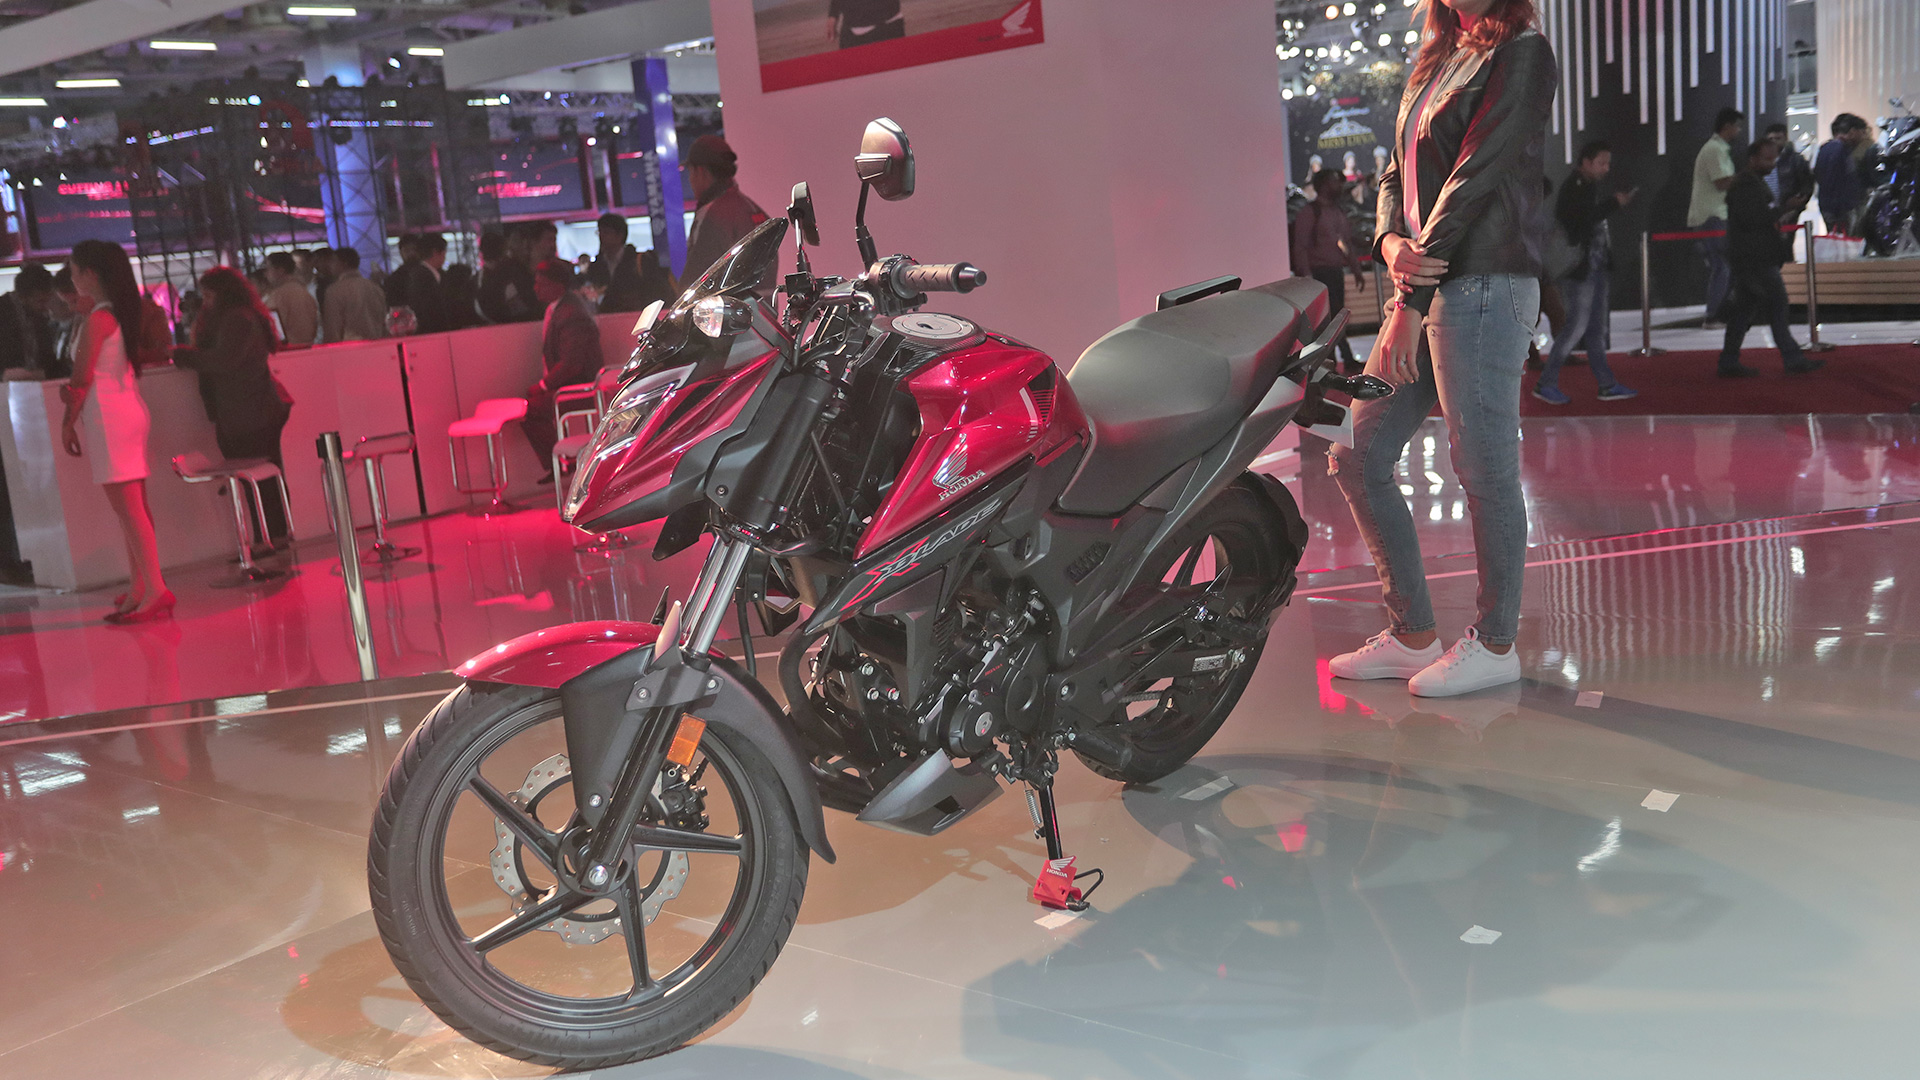 Honda X-Blade 2019 - Price, Mileage, Reviews, Specification, Gallery ...